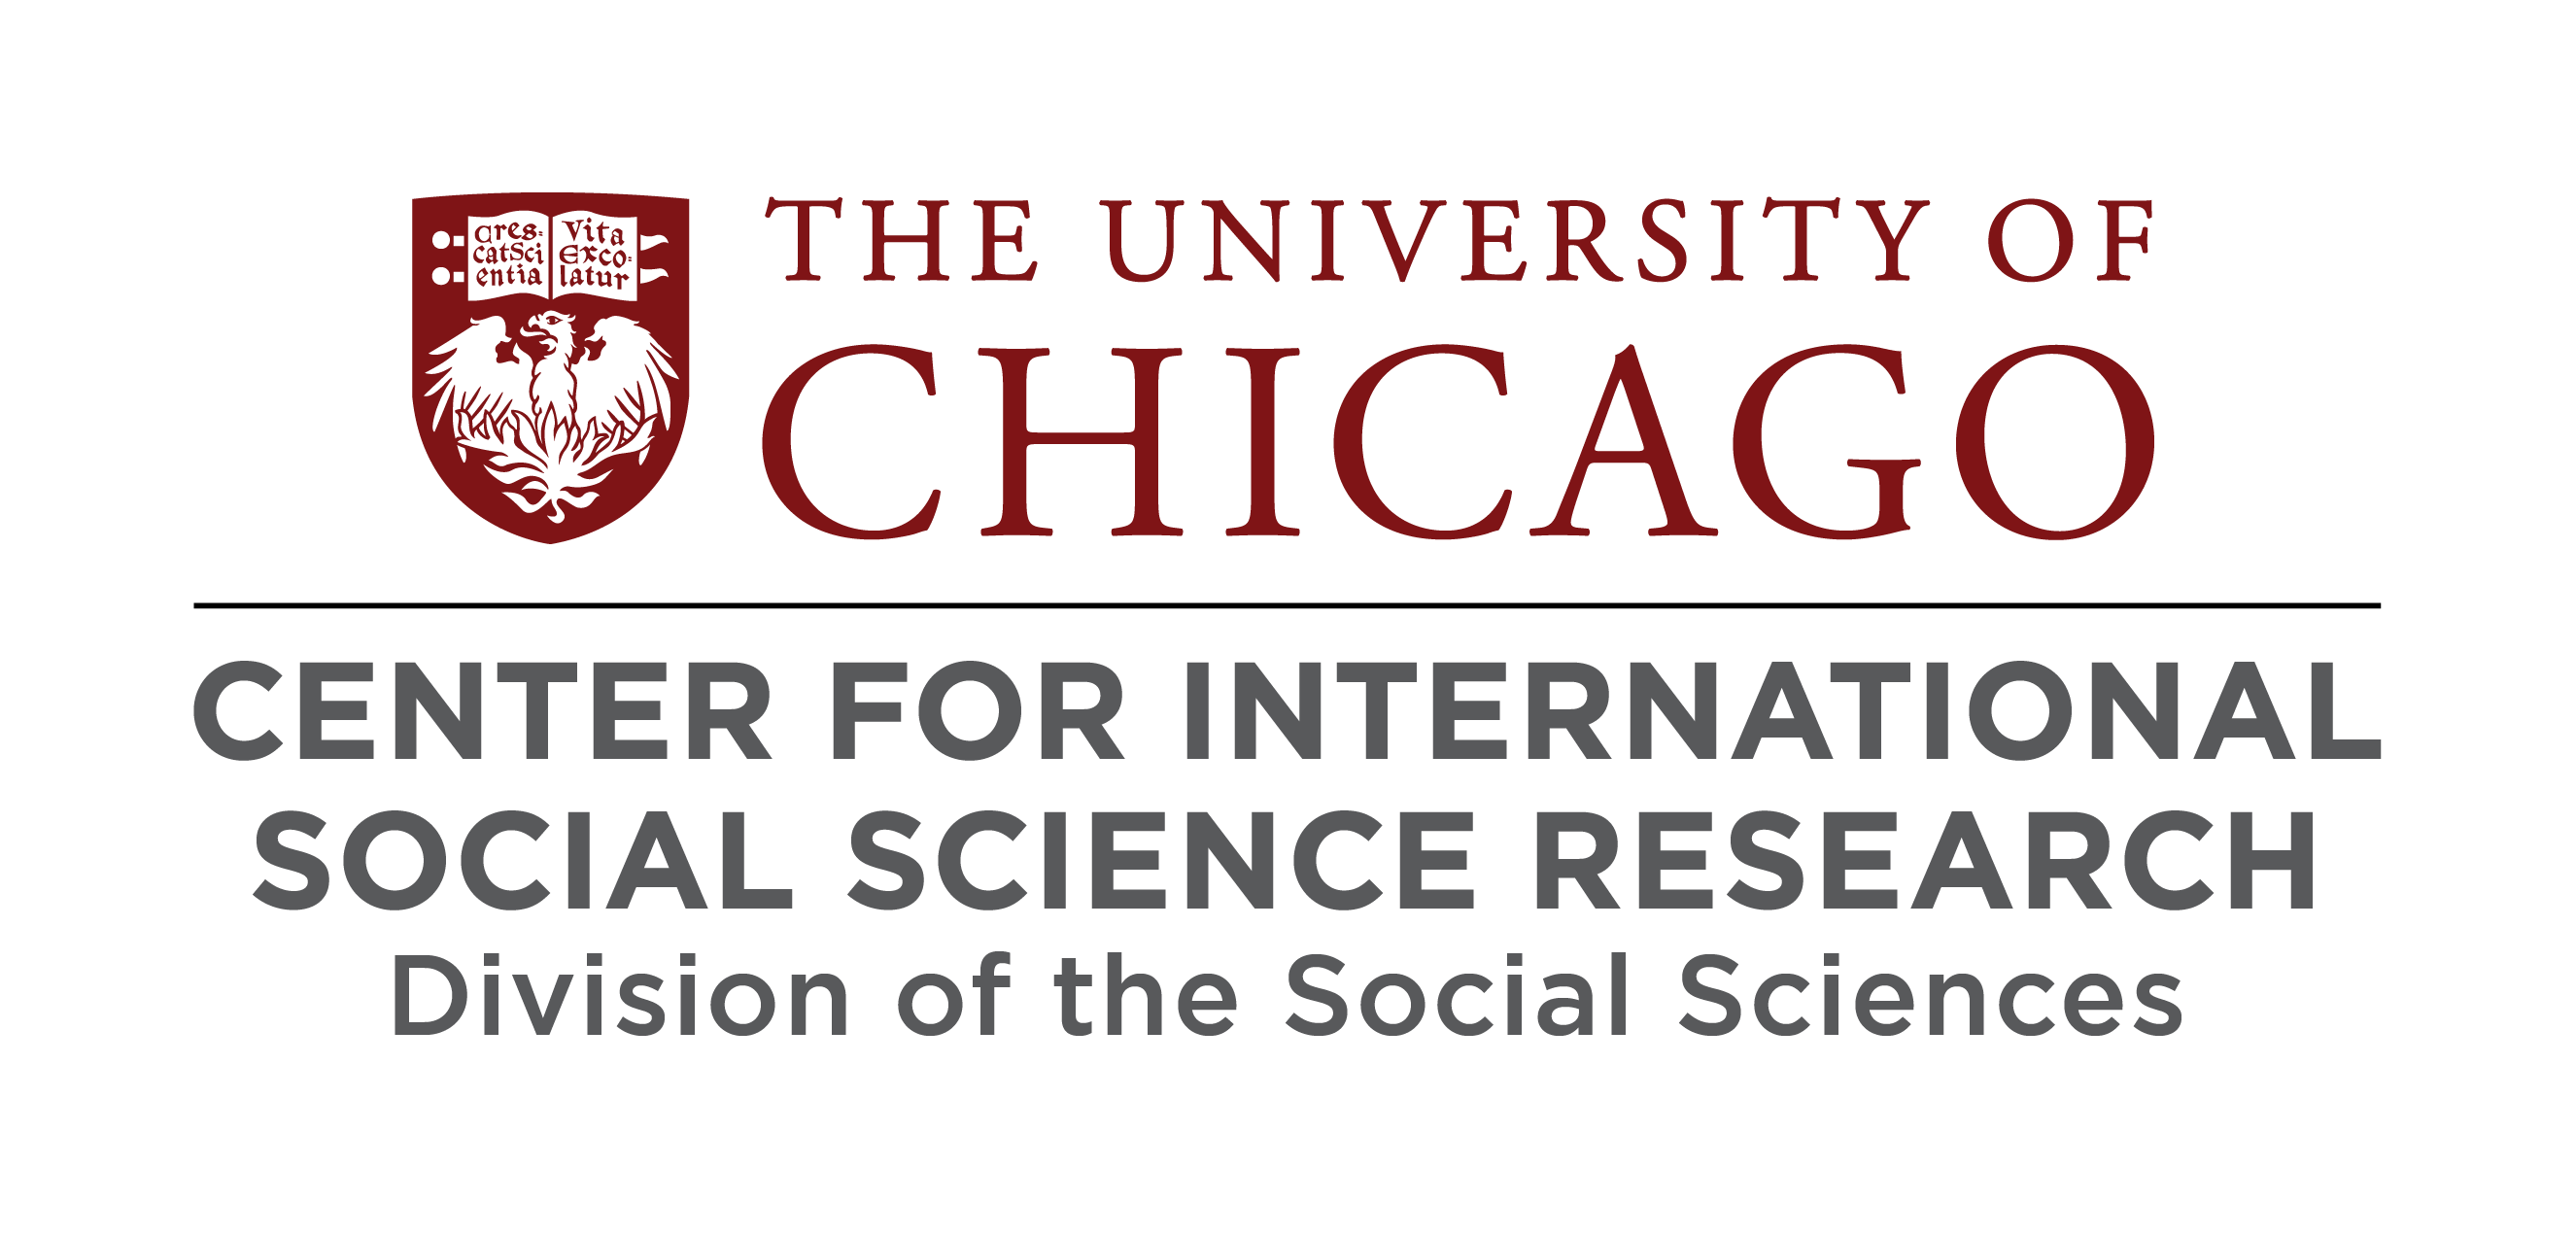 UC Center for International Social Science Research Logo